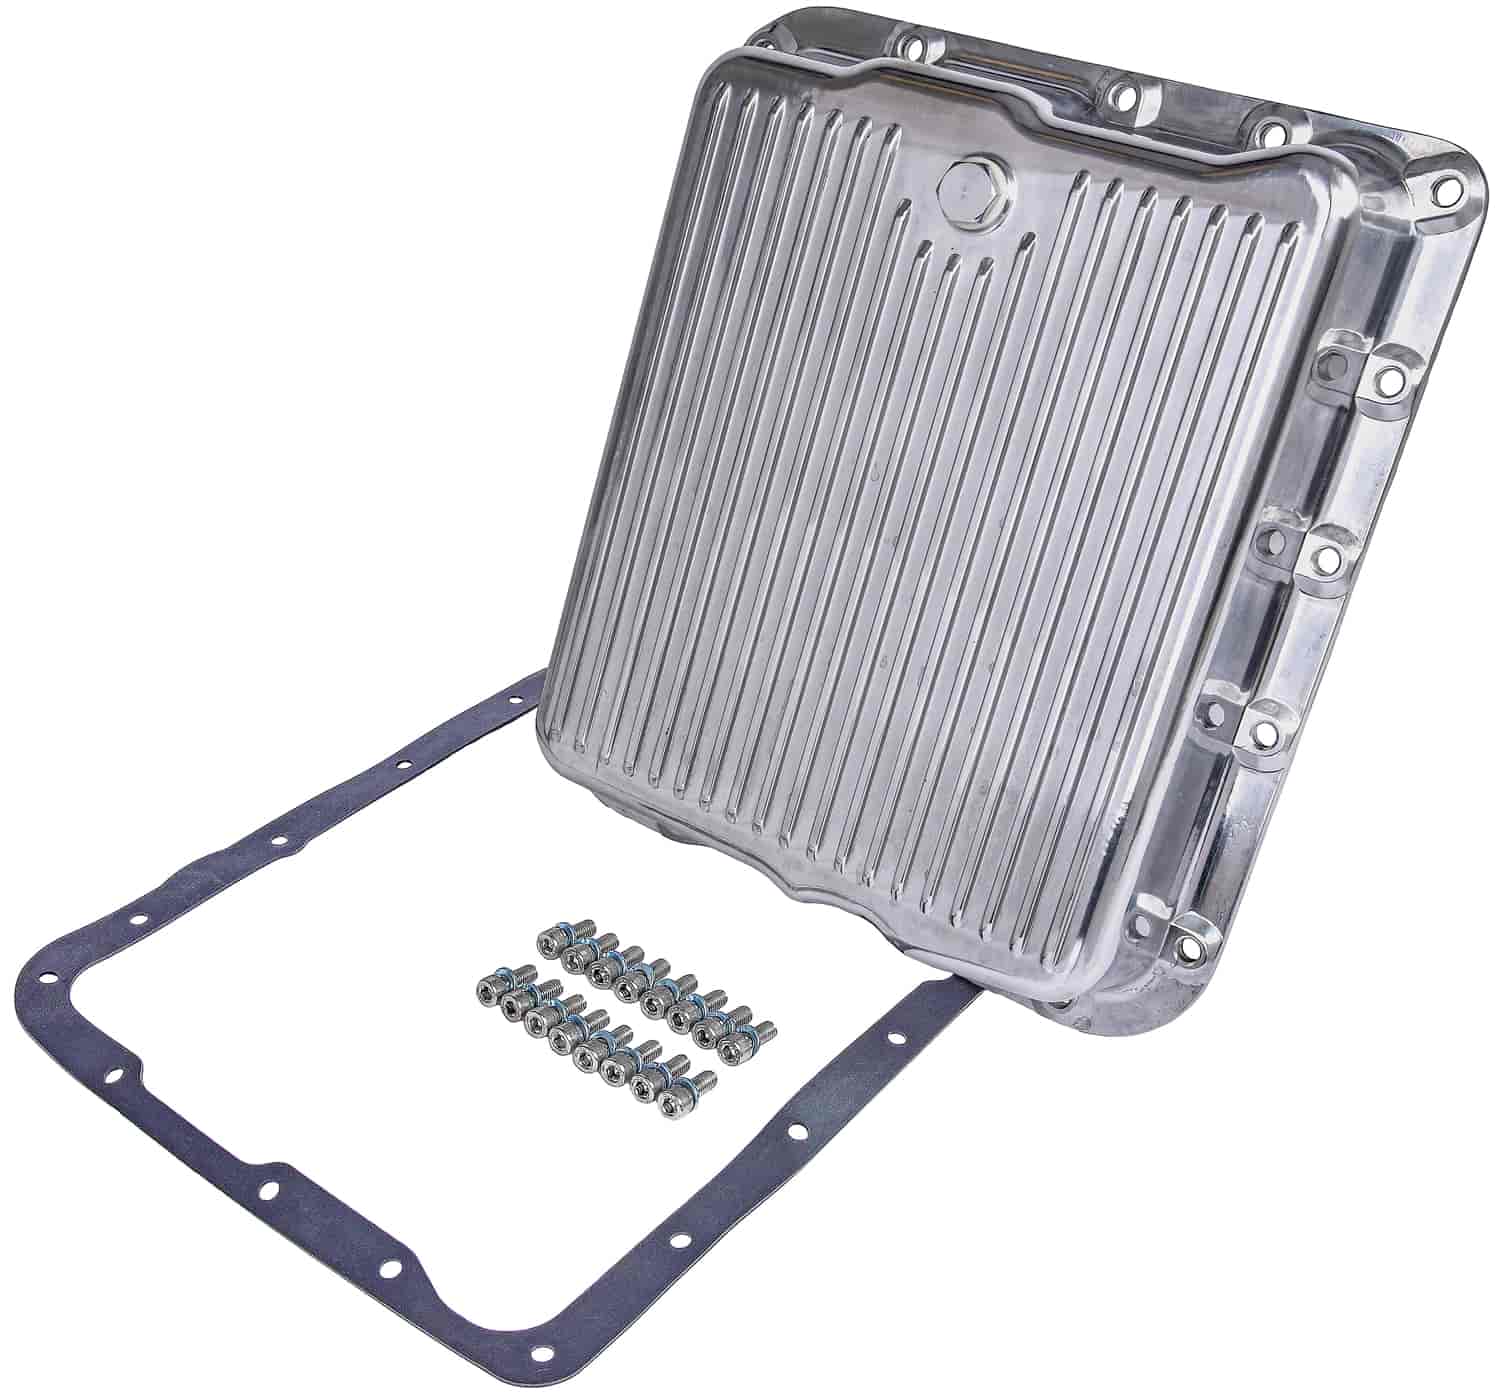 Polished Aluminum Transmission Pan for TH700-R4 and 4L60